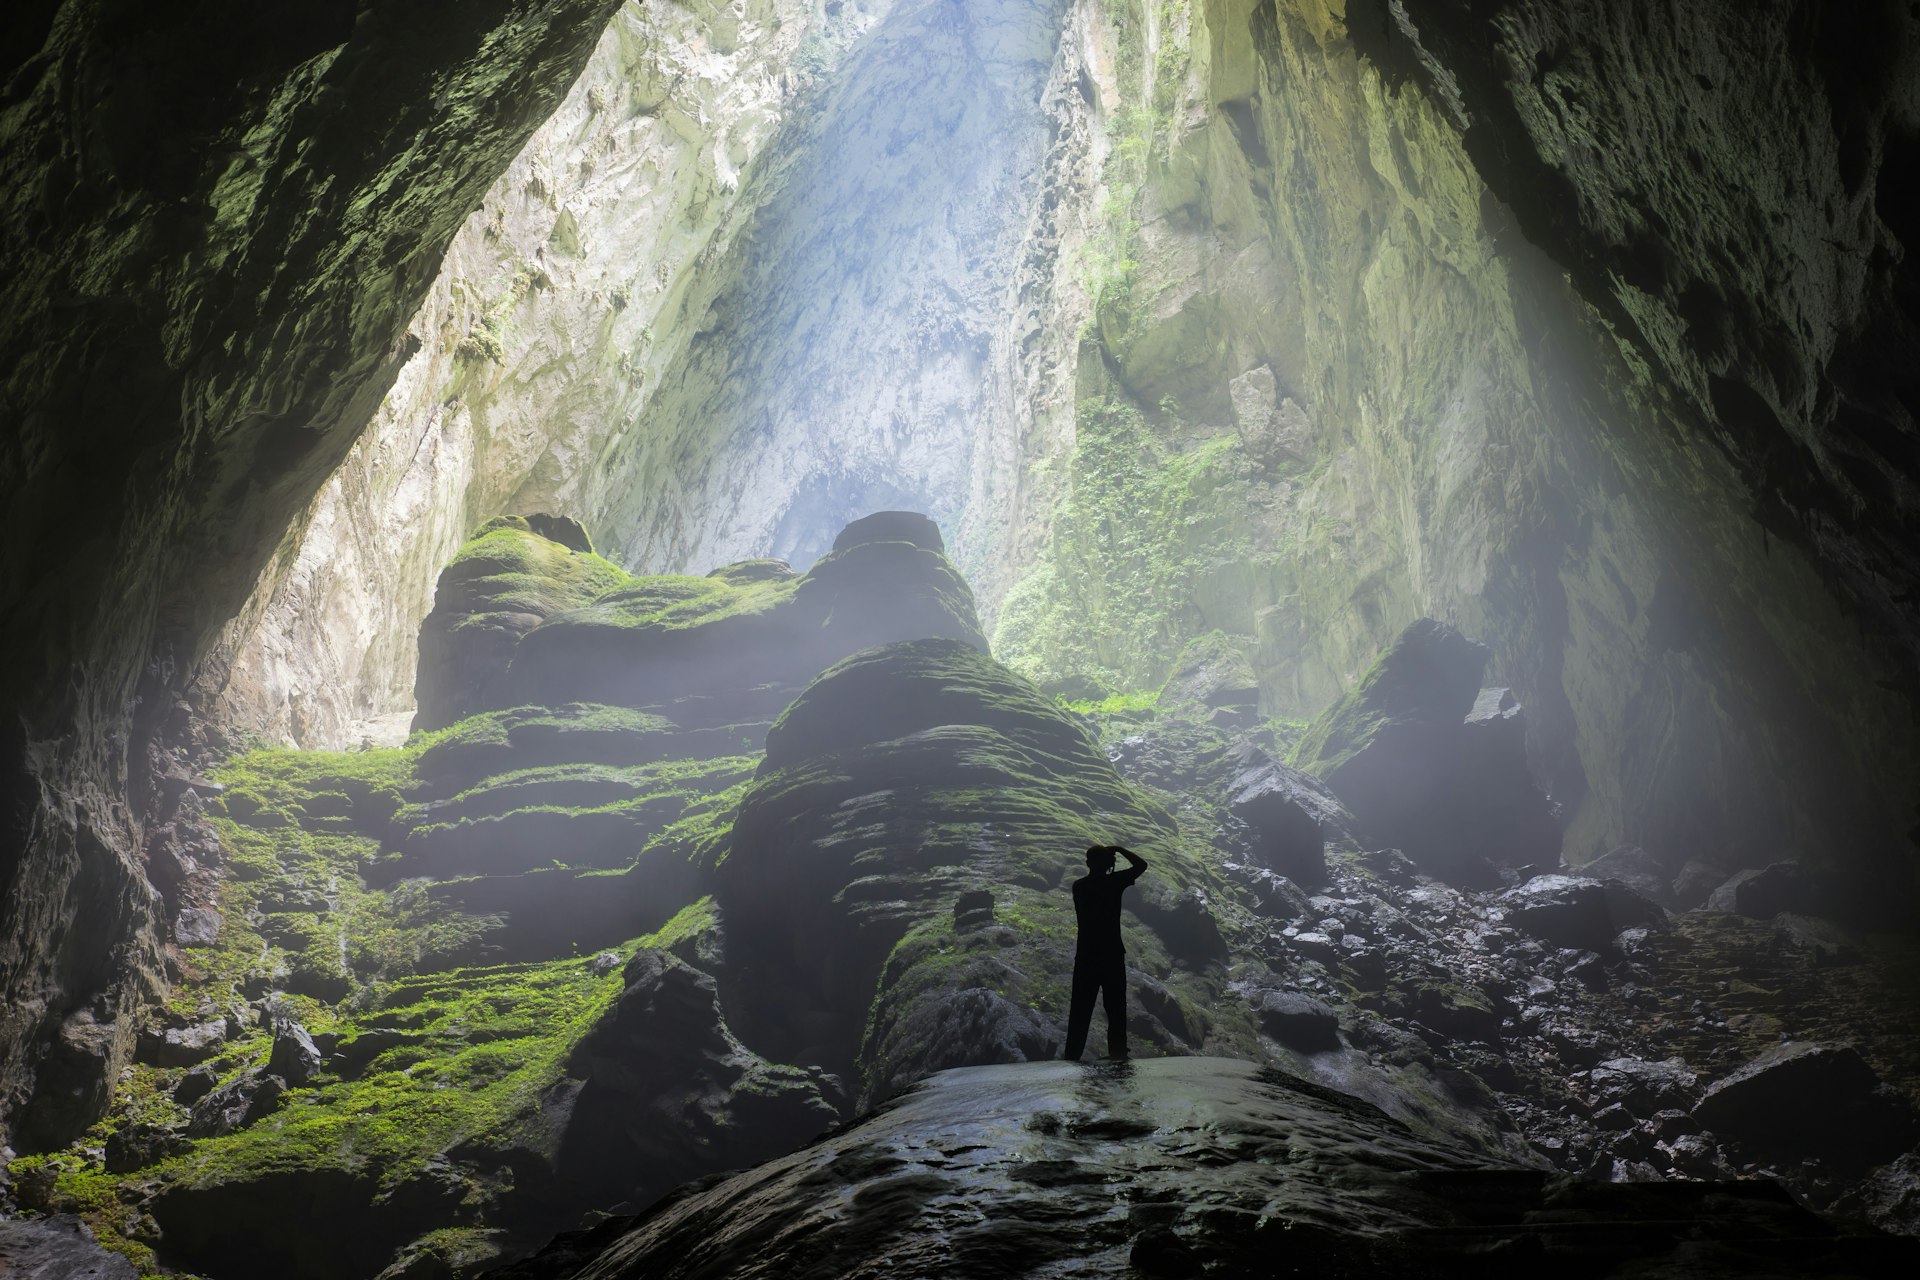 Man at the cave entrance in Son Doong Cave, the largest cave in the world in UNESCO World Heritage Site Phong Nha-Ke Bang National Park